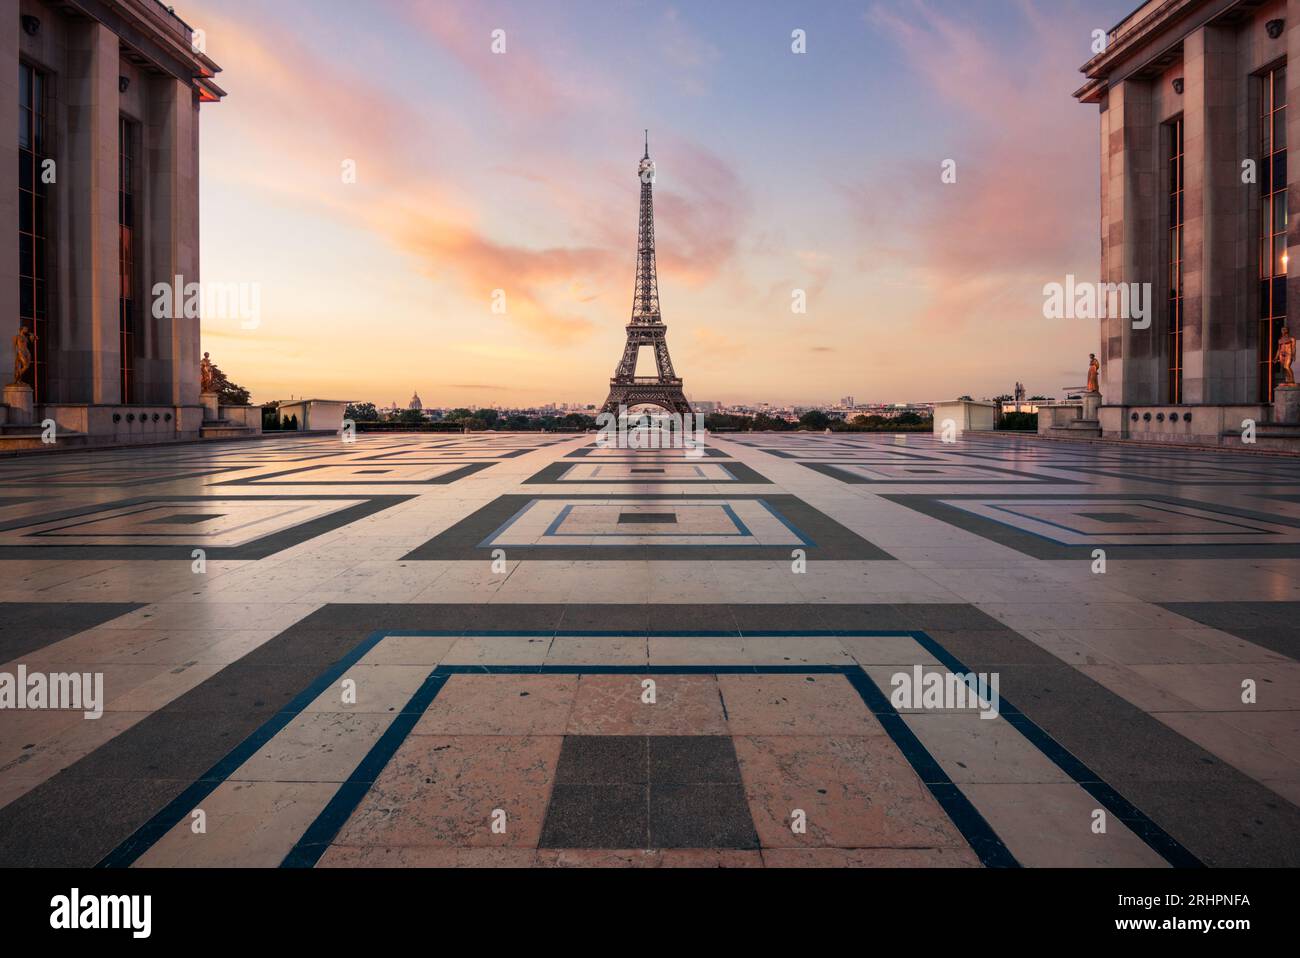 Eiffel tower in Paris, France during sunrise from the Trocadero Stock Photo